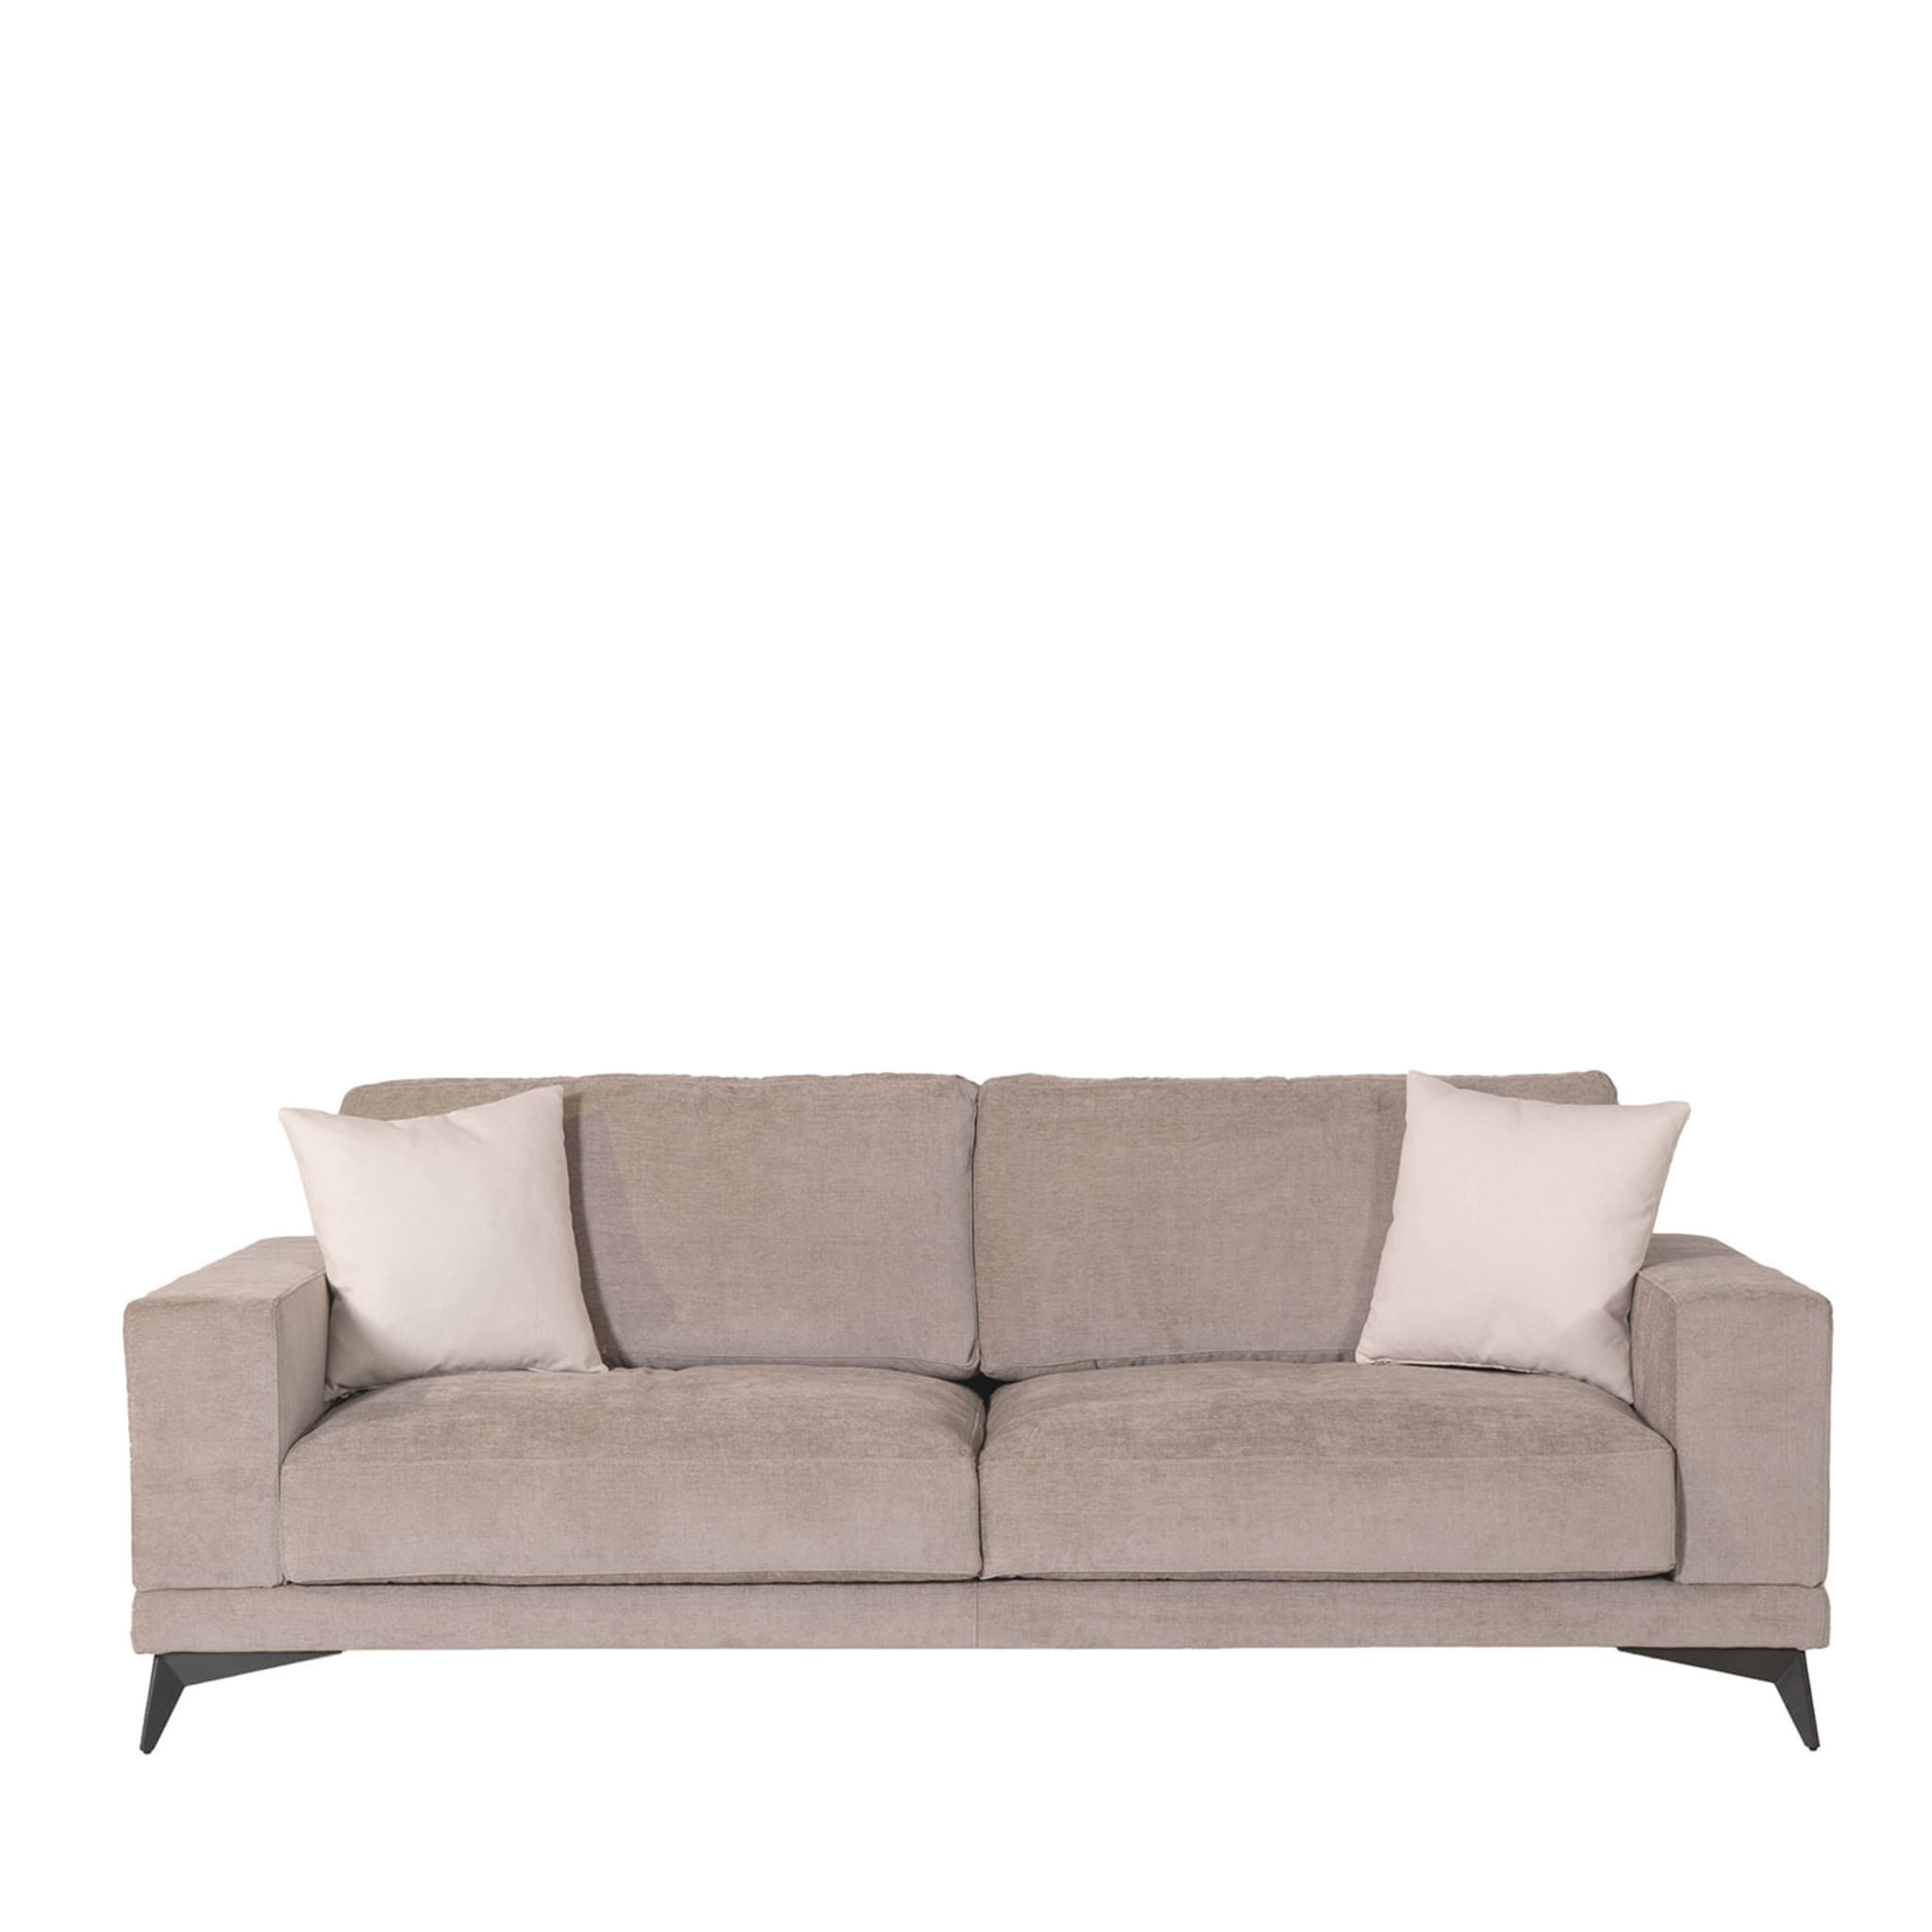 Tesla 2 Seater Sofa by Marco and Giulio Mantellassi - Main view